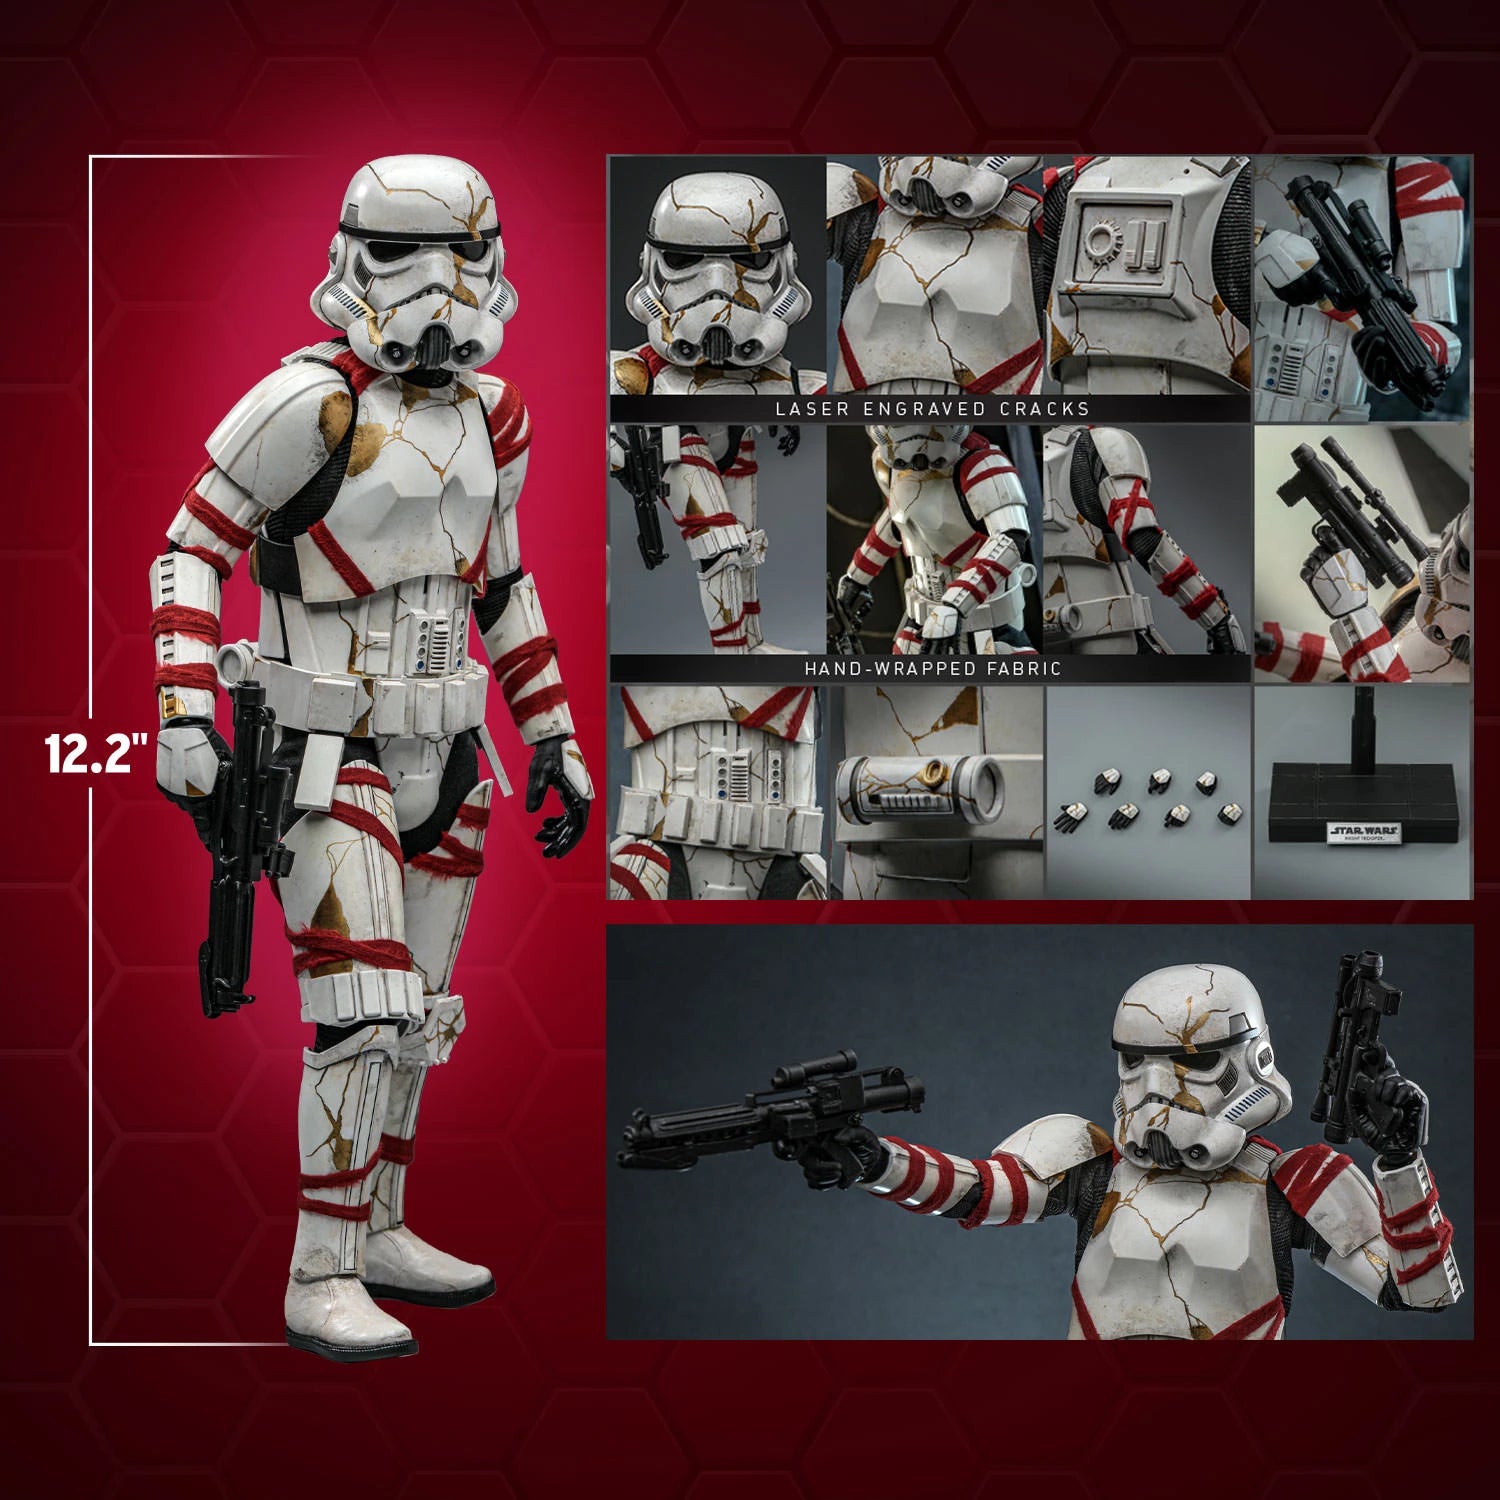 NIGHT TROOPER™ Sixth Scale Figure By Hot Toys